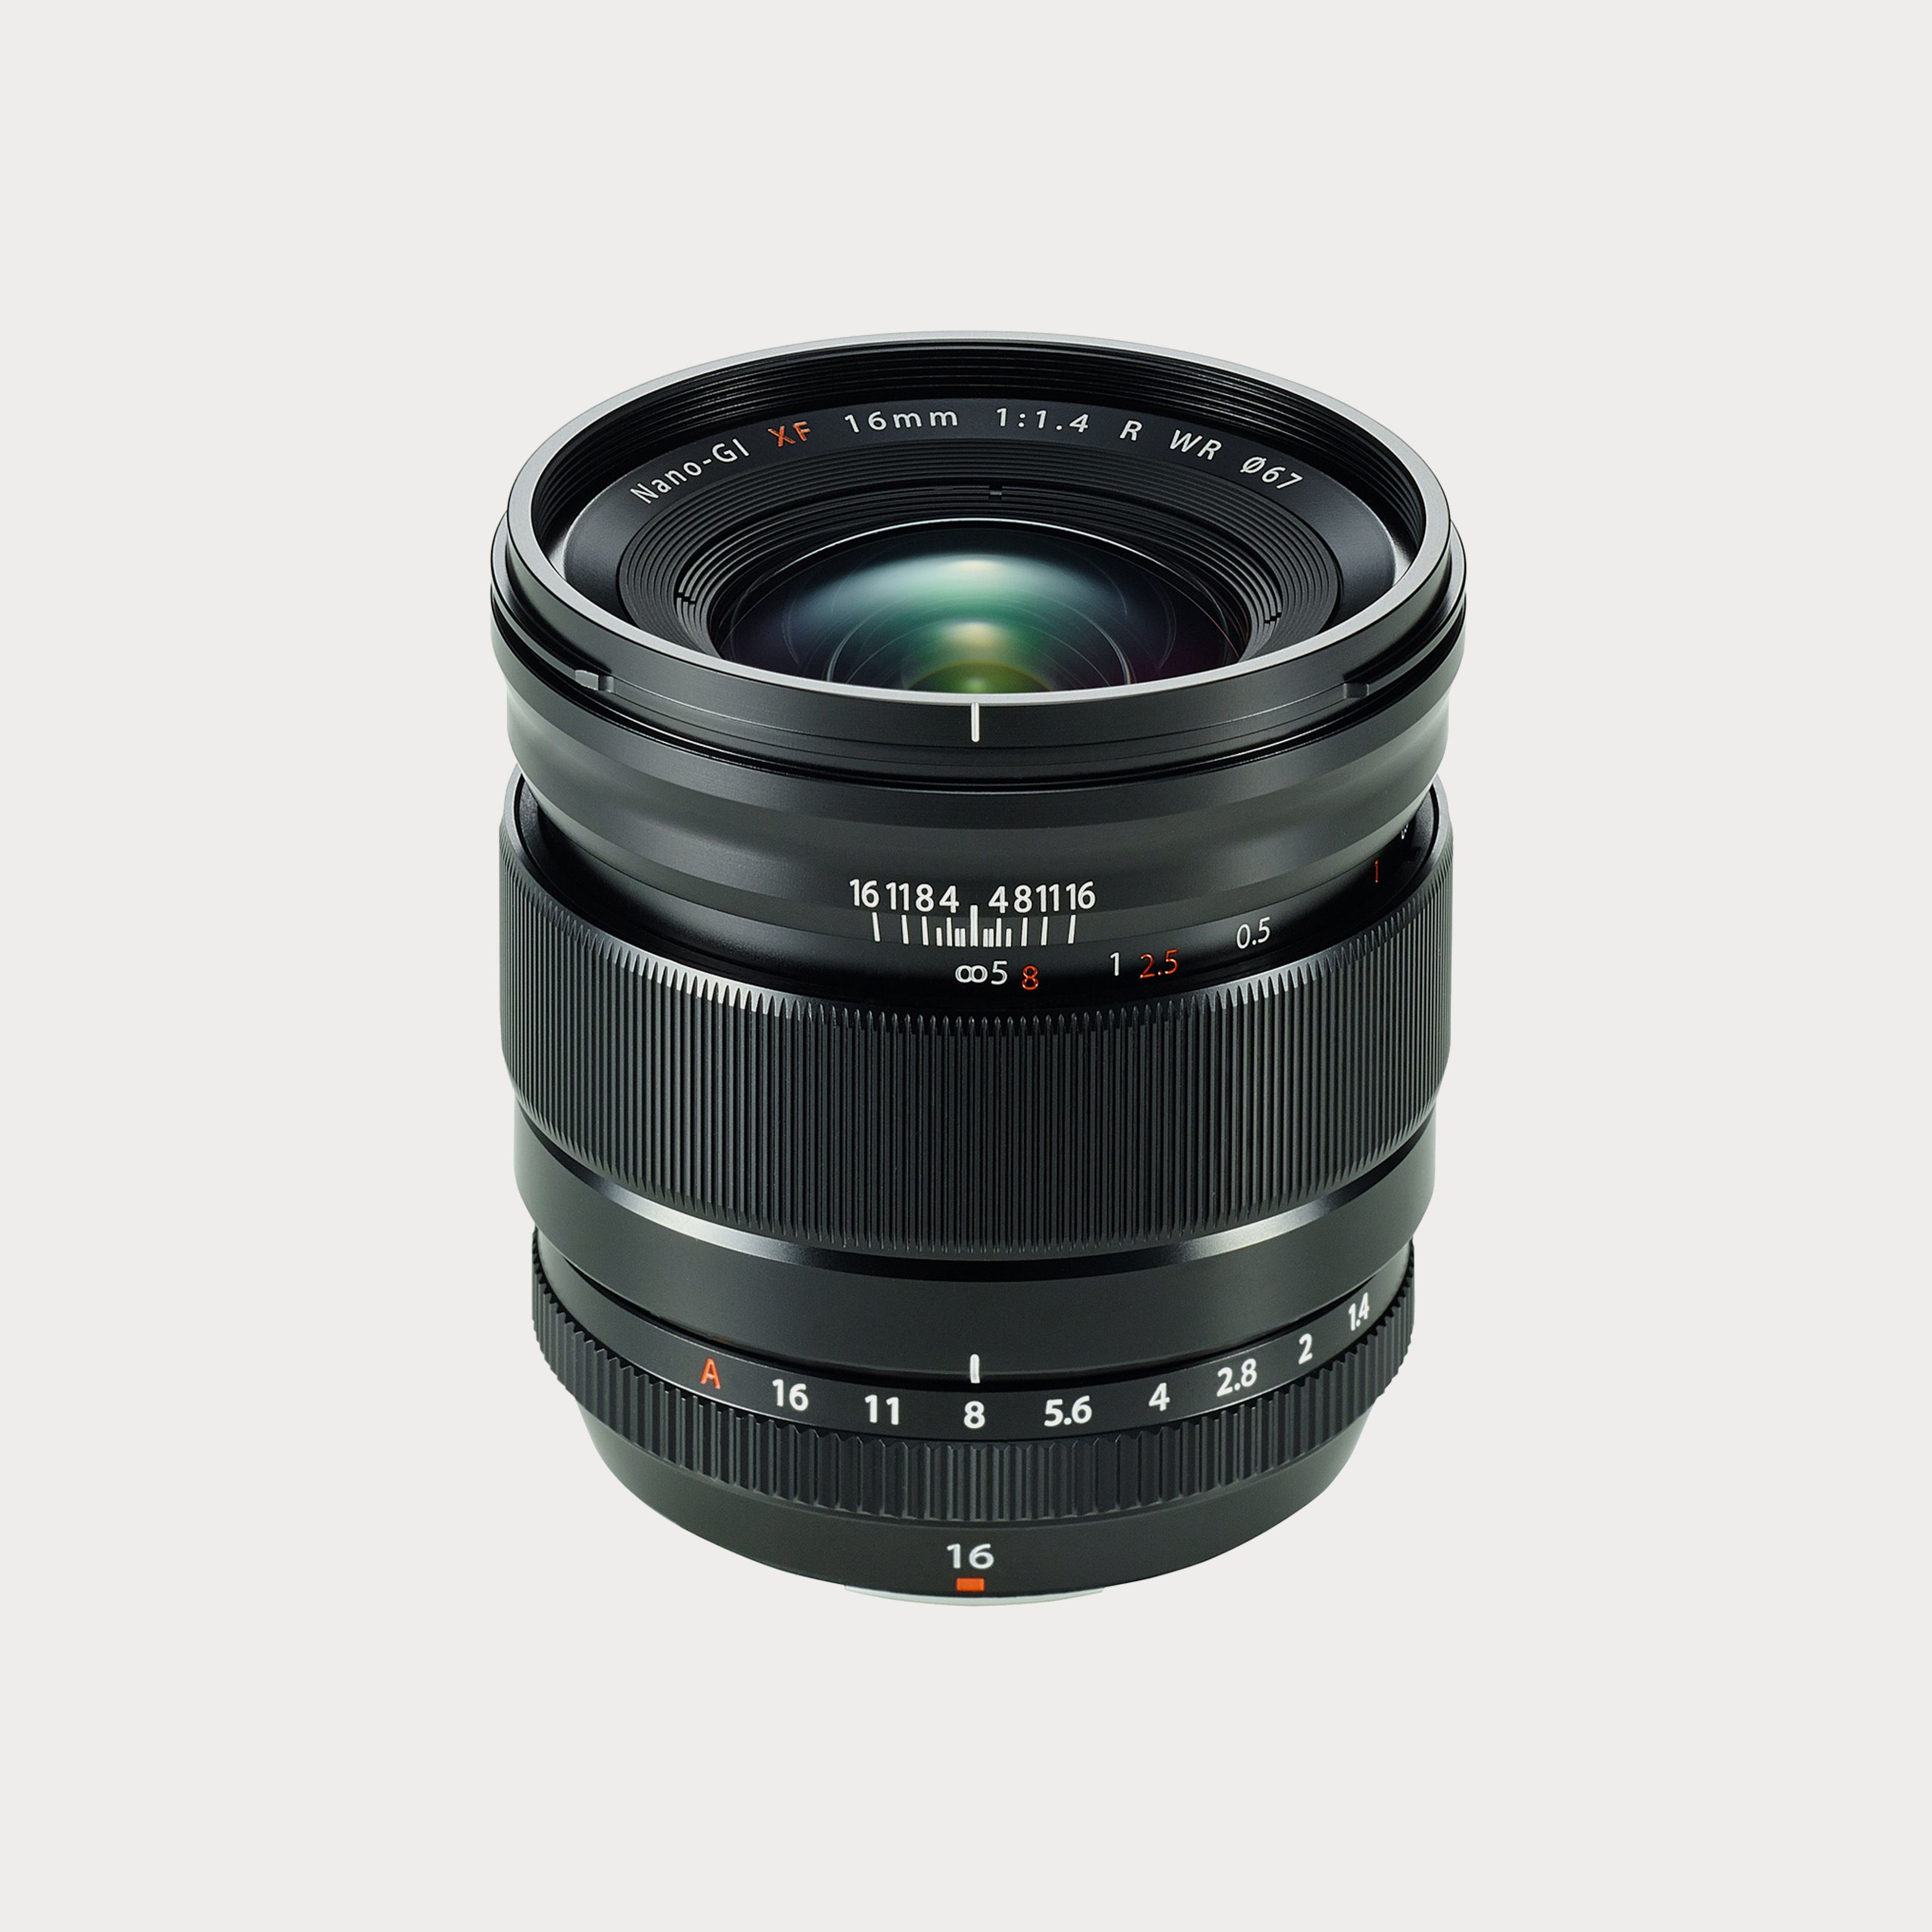 Fujifilm XF 16-55mm F2.8 R LM WR Lens - Lens Only | Moment